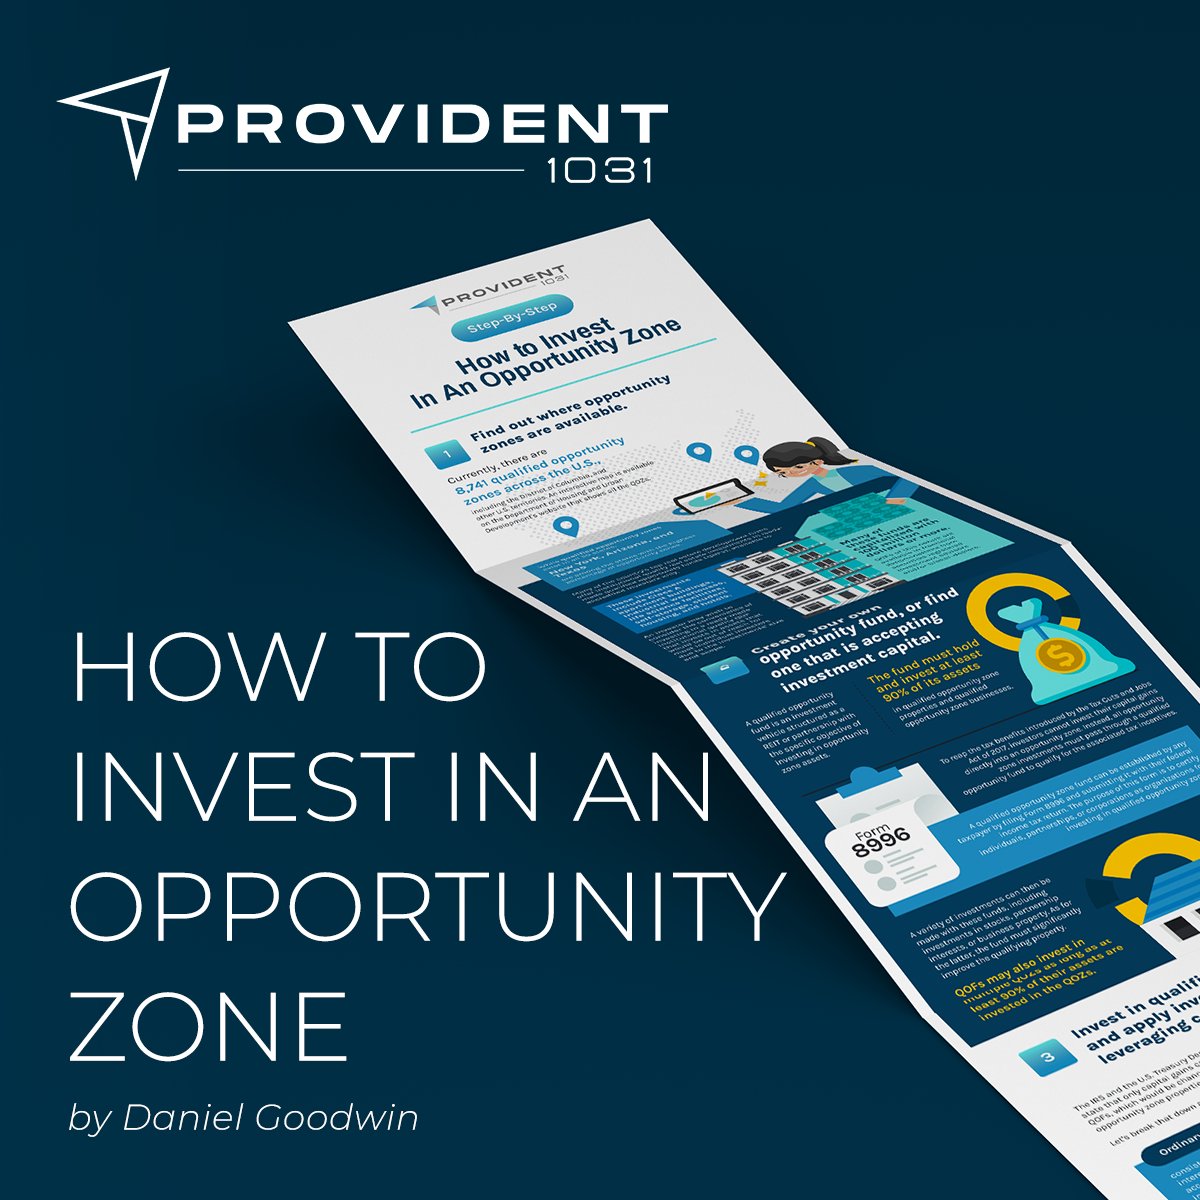 Get our FREE infographic: How To Invest In An Opportunity Zone - Also check out our comprehensive Guide to Qualified Opportunity Zones. - provident1031.com/guide-to-quali…

#QOZ #QualifiedOpportunityFund #QualifiedOpportunityZone #1031exchange #DSTs #DelawareStatutoryTrust #Provident1031